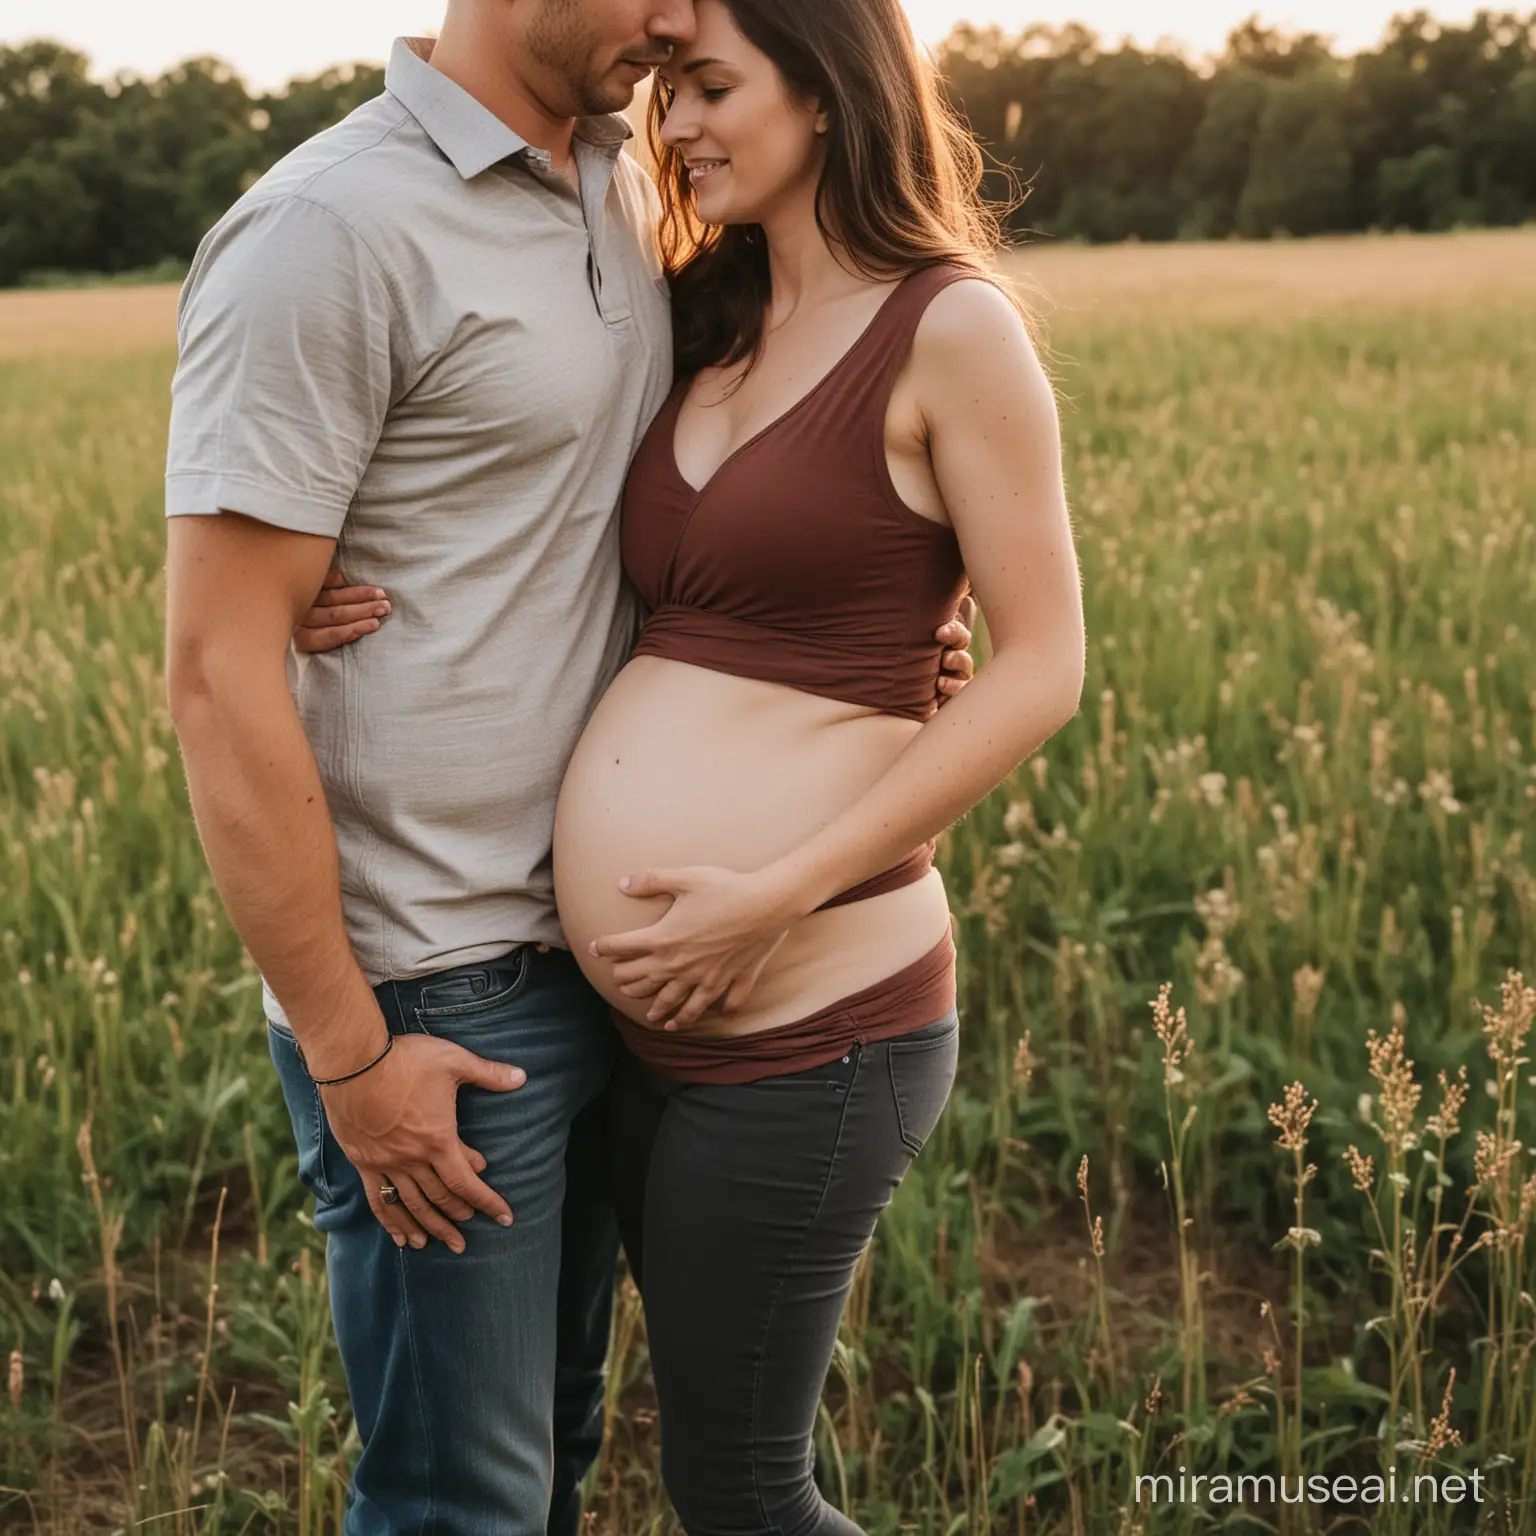 Outdoor Pregnancy Photoshoot Partners Loving Embrace in a Field